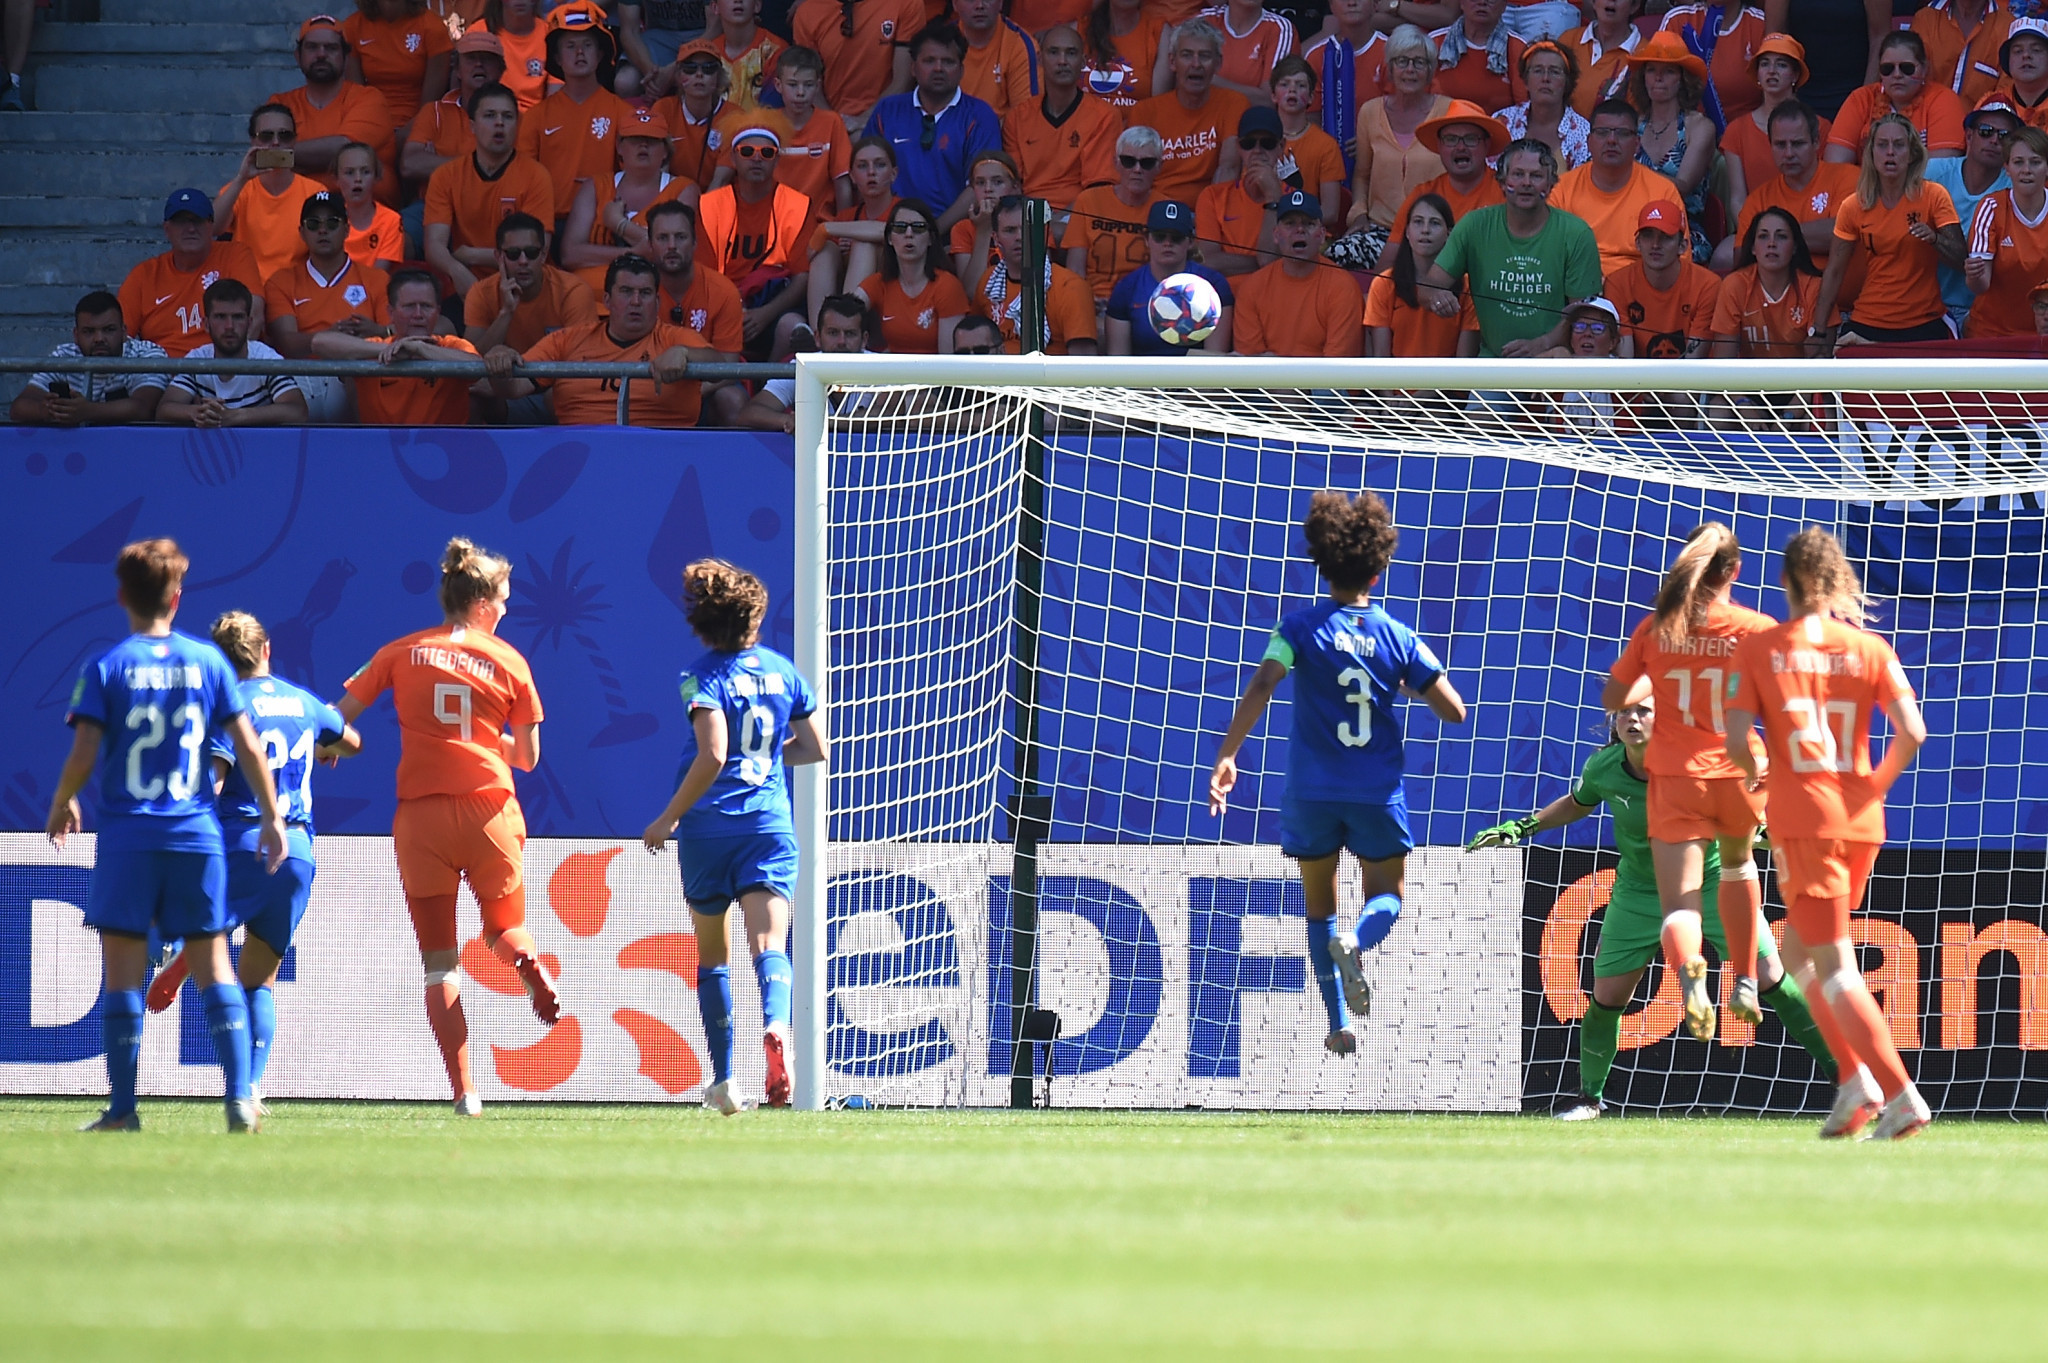 Vivianne Miedema scores the opening goal for The Netherlands in their 2-0 quarter-final victory over Italy to book a place in the semi-final and at next year's Olympic Games in Tokyo ©Getty Images